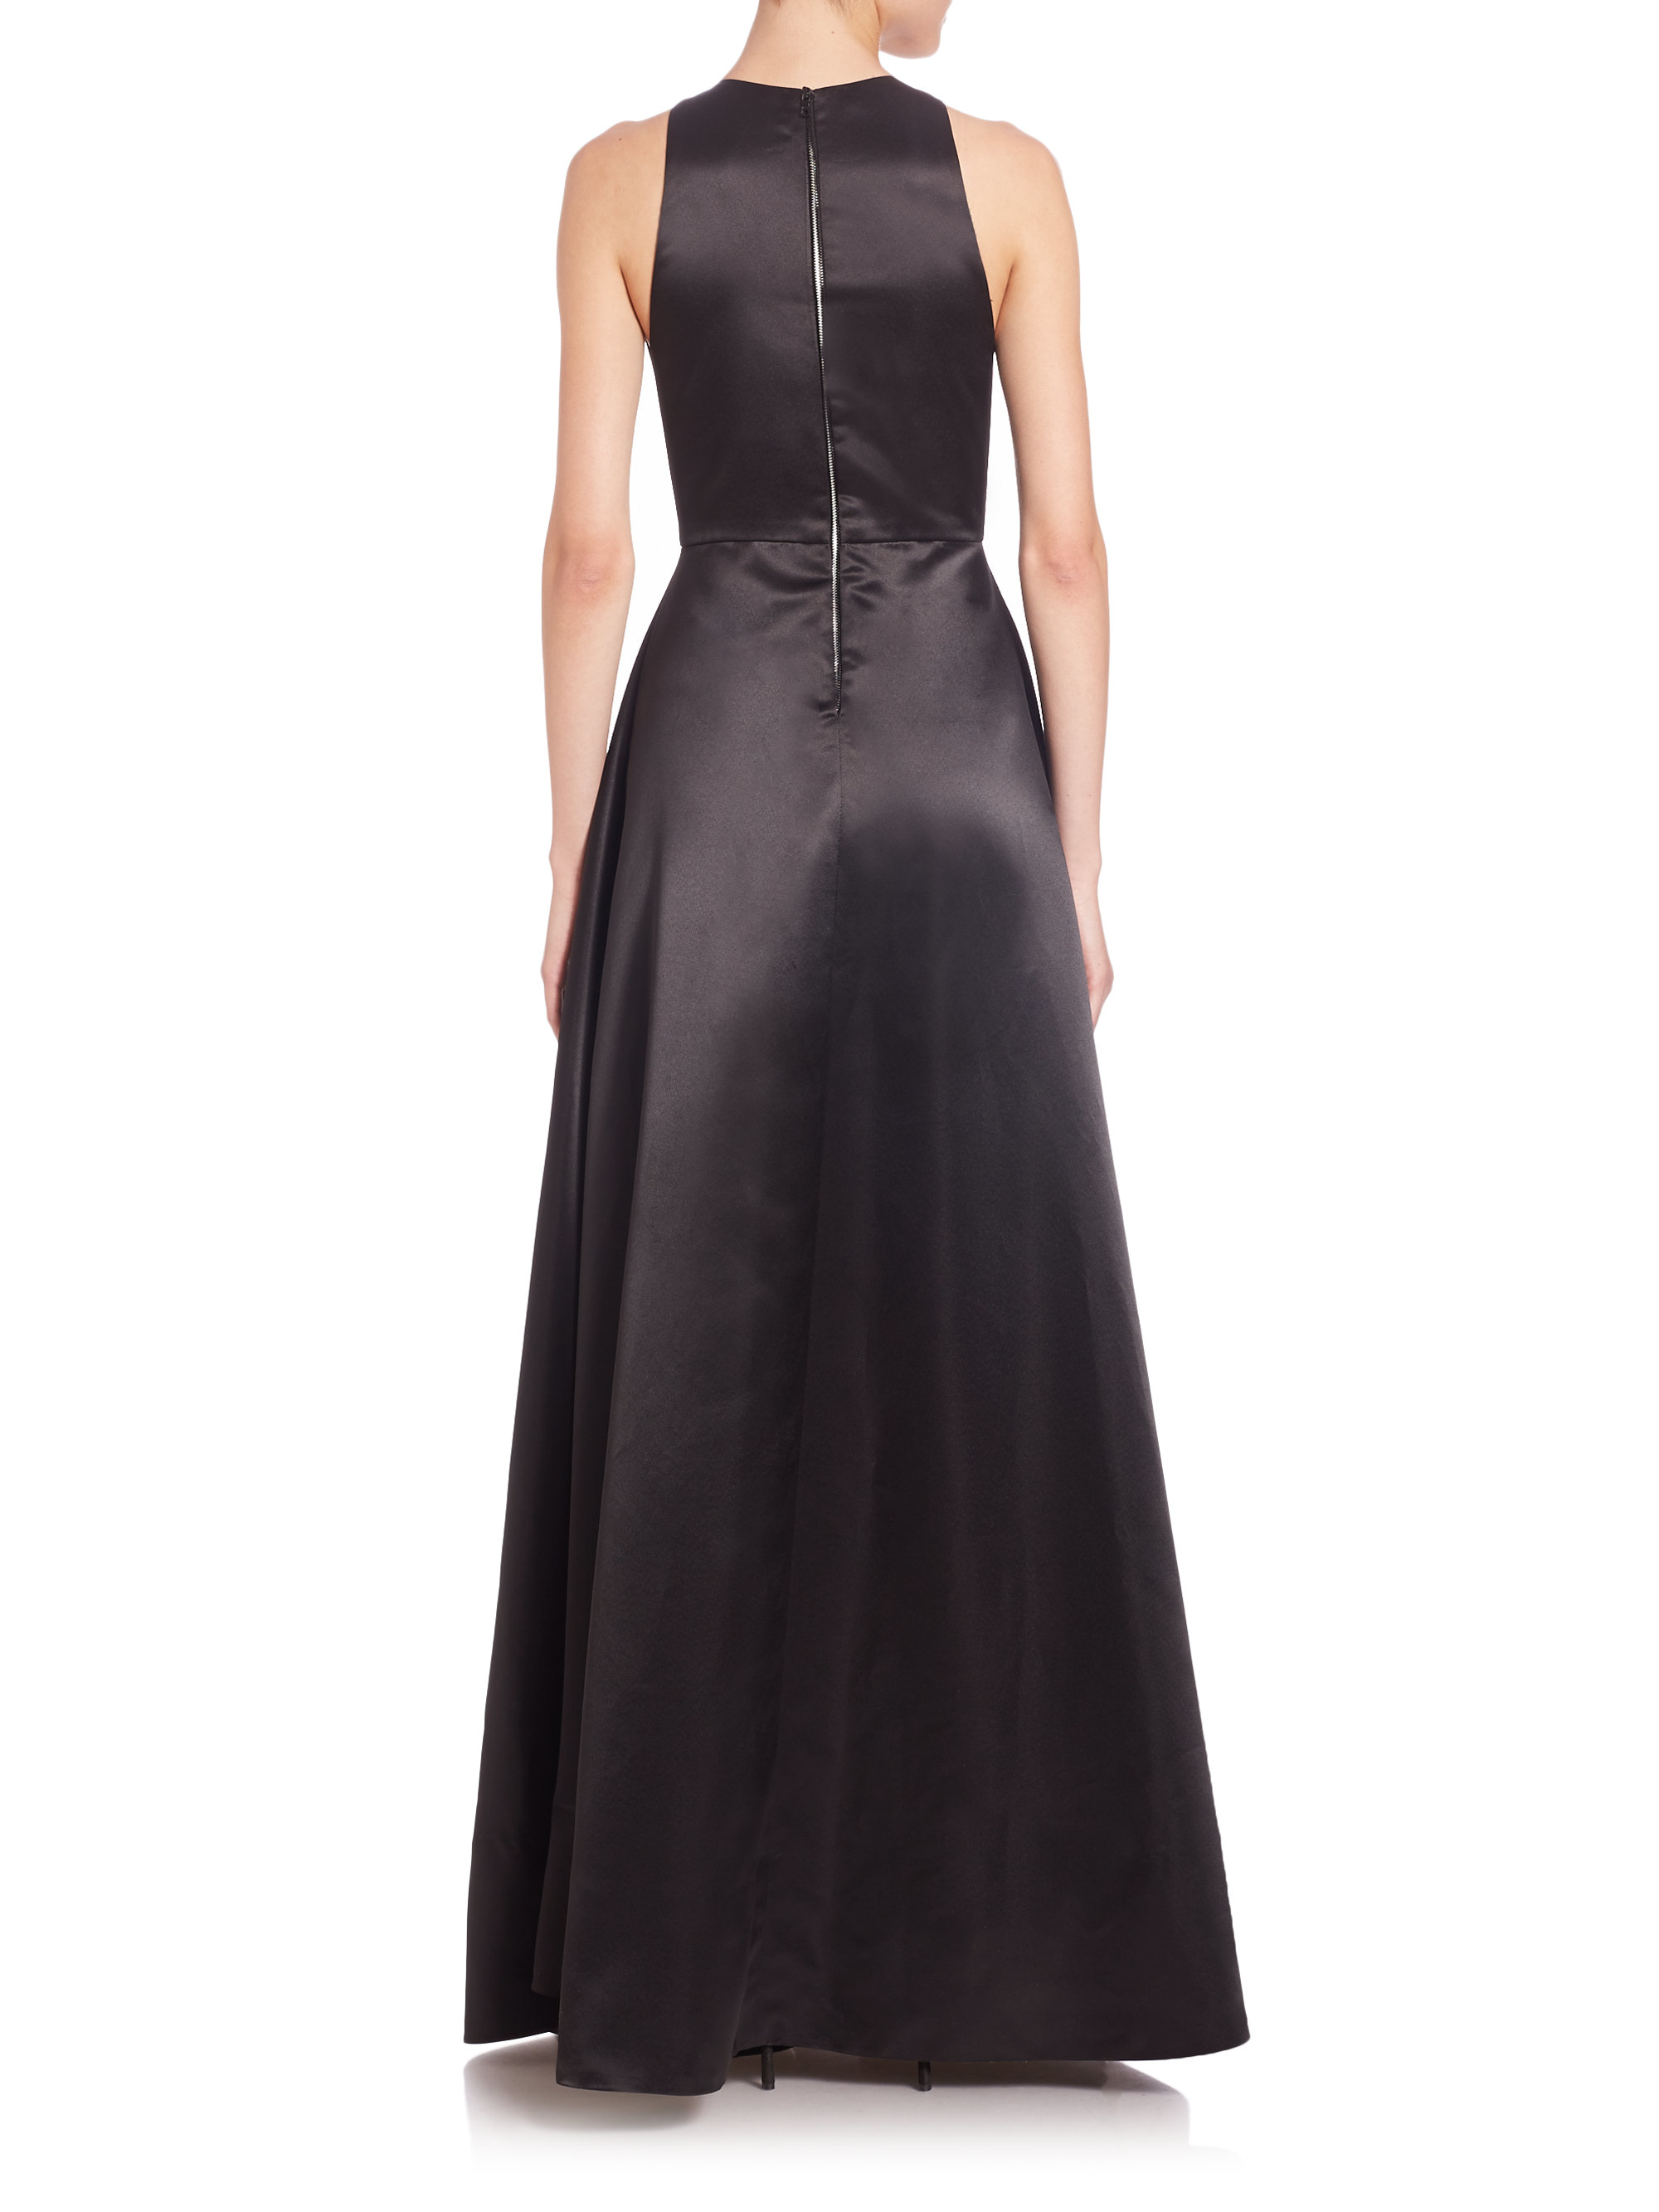 Lyst - Alice + Olivia Clarabelle Sleeveless Pleated Gown in Black